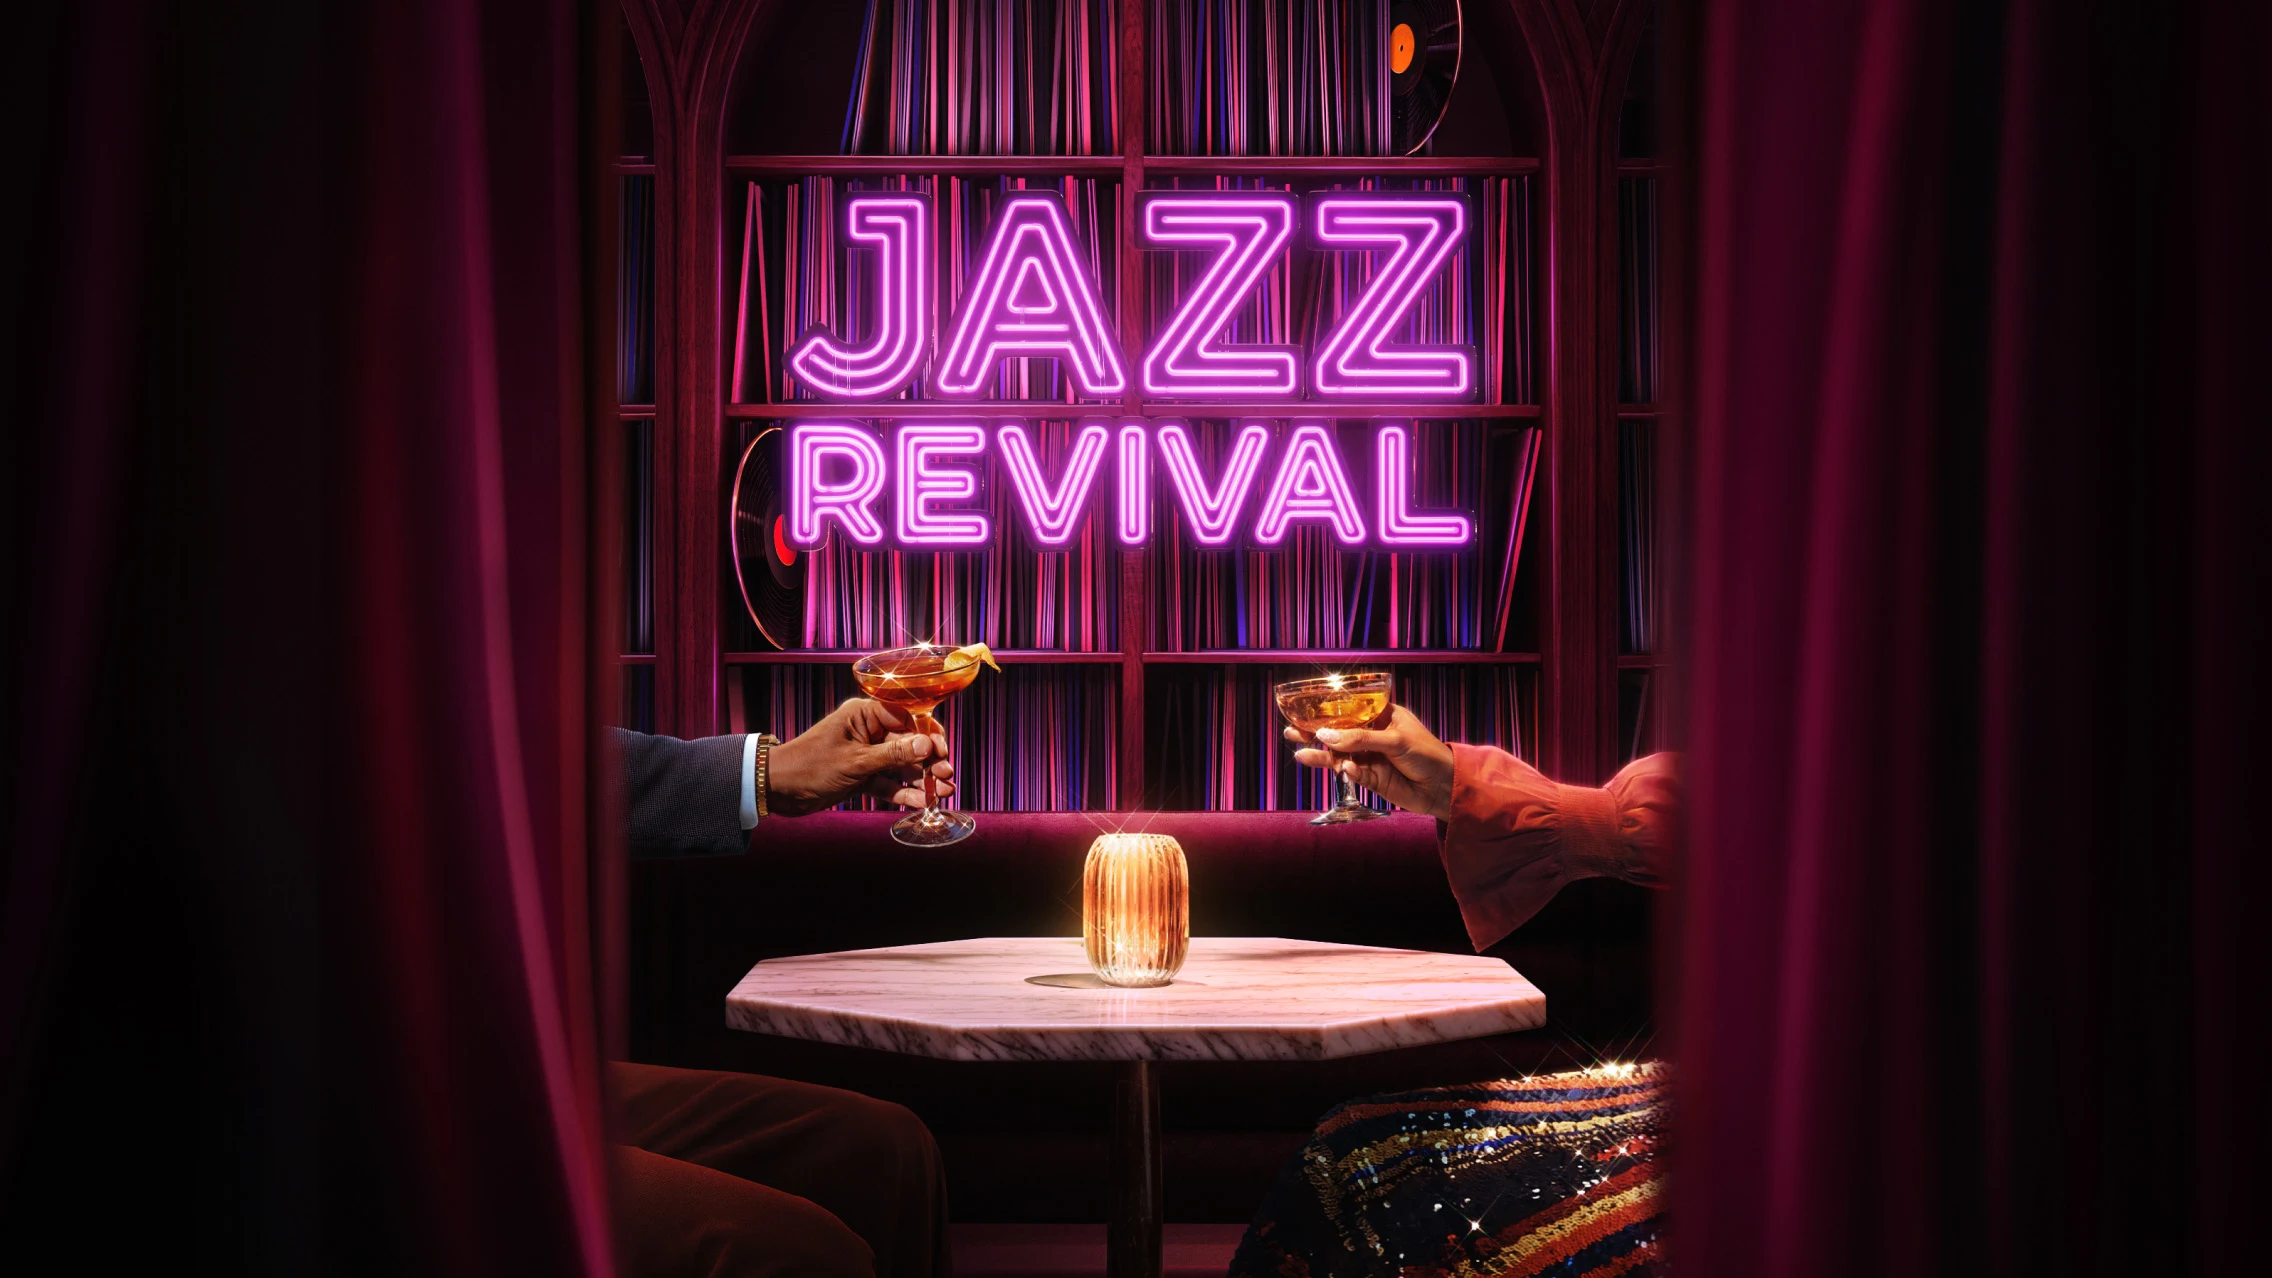 Dimly lit jazz bar with velvet curtains features two hands outstretched with cocktails under a neon sign. Neon sign in the background reads “Jazz revival” in hot pink letters.